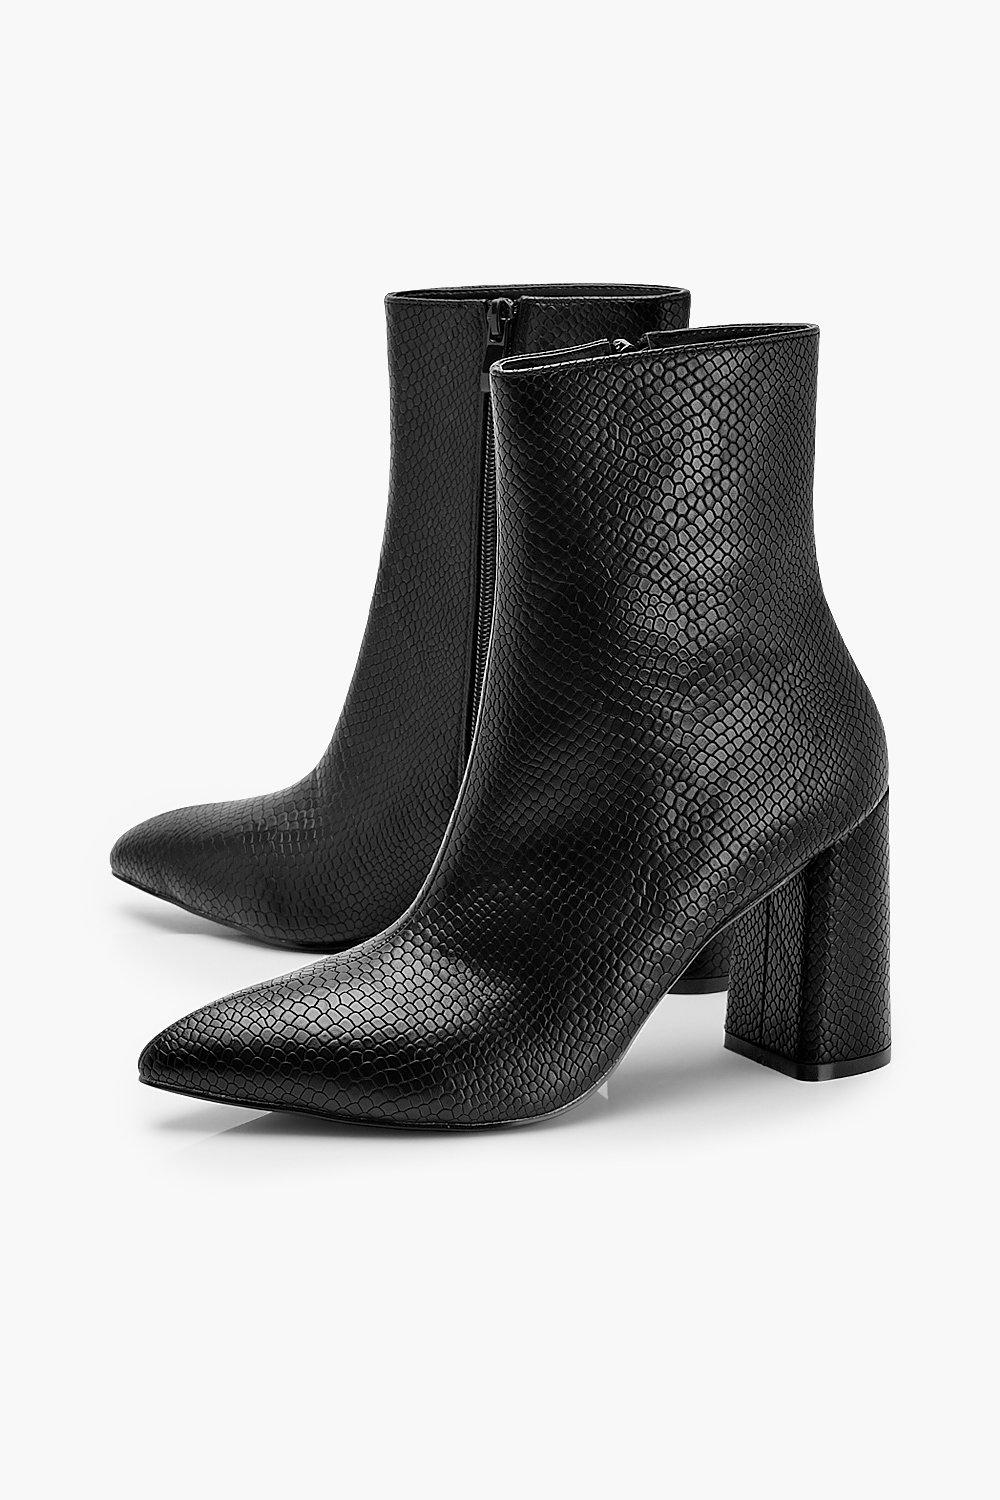 black pointed sock boot